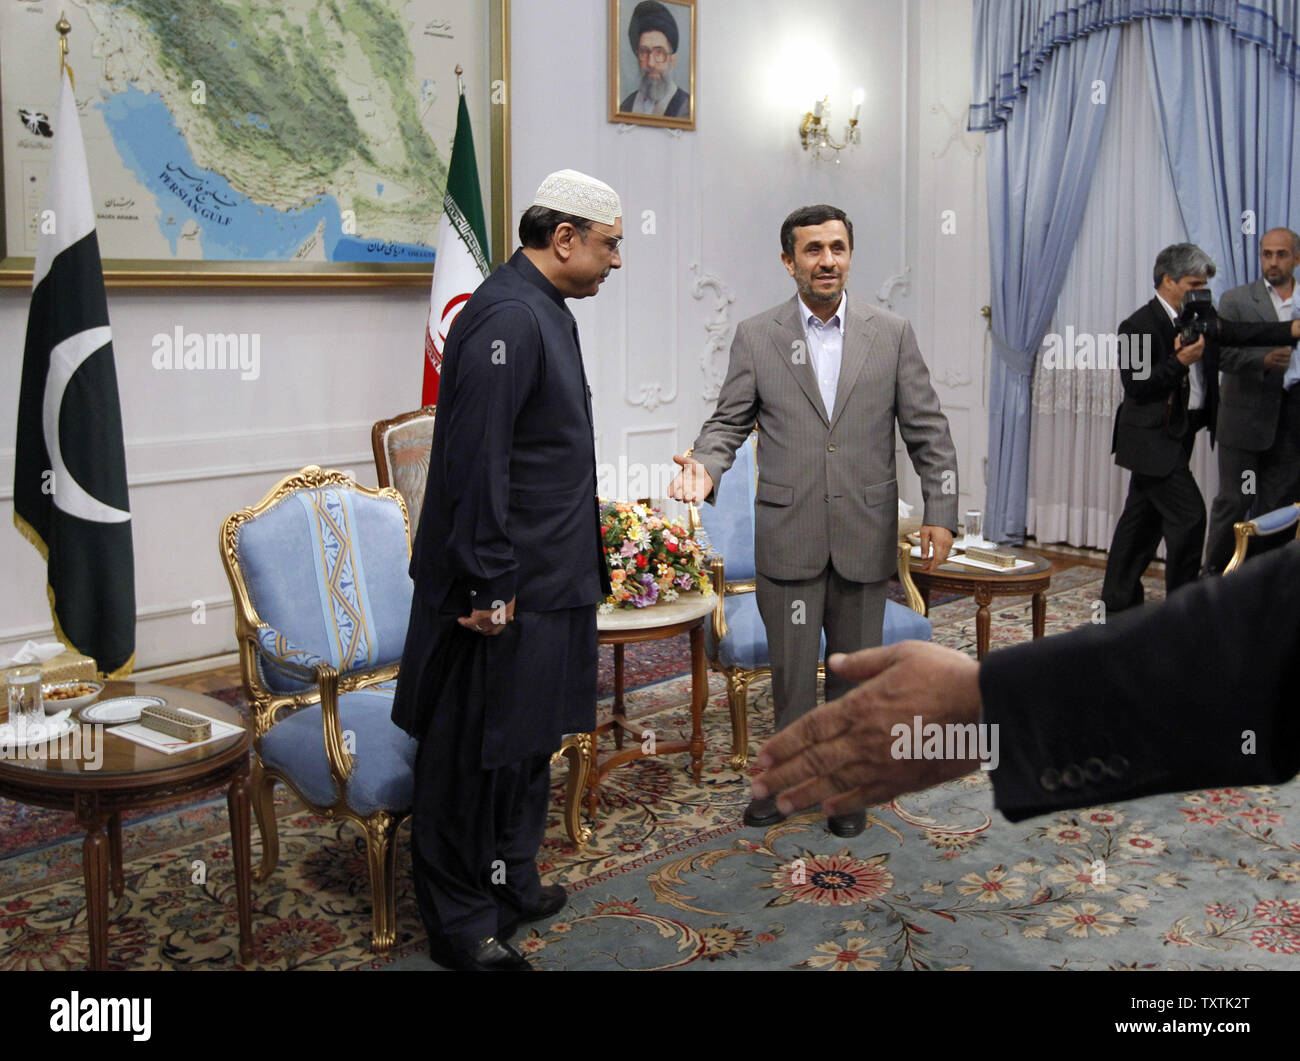 Iranian President Mahmoud Ahmadinejad (R) greets his Pakistani counterpart Asif Ali Zardari (L) in the presidential palace on June 24, 2011 in Tehran. Zardari  scheduled to participate in the Global Fight against Terrorism International Summit which will be held on June 25 and 26 in Tehran.     UPI/Maryam Rahmanian Stock Photo